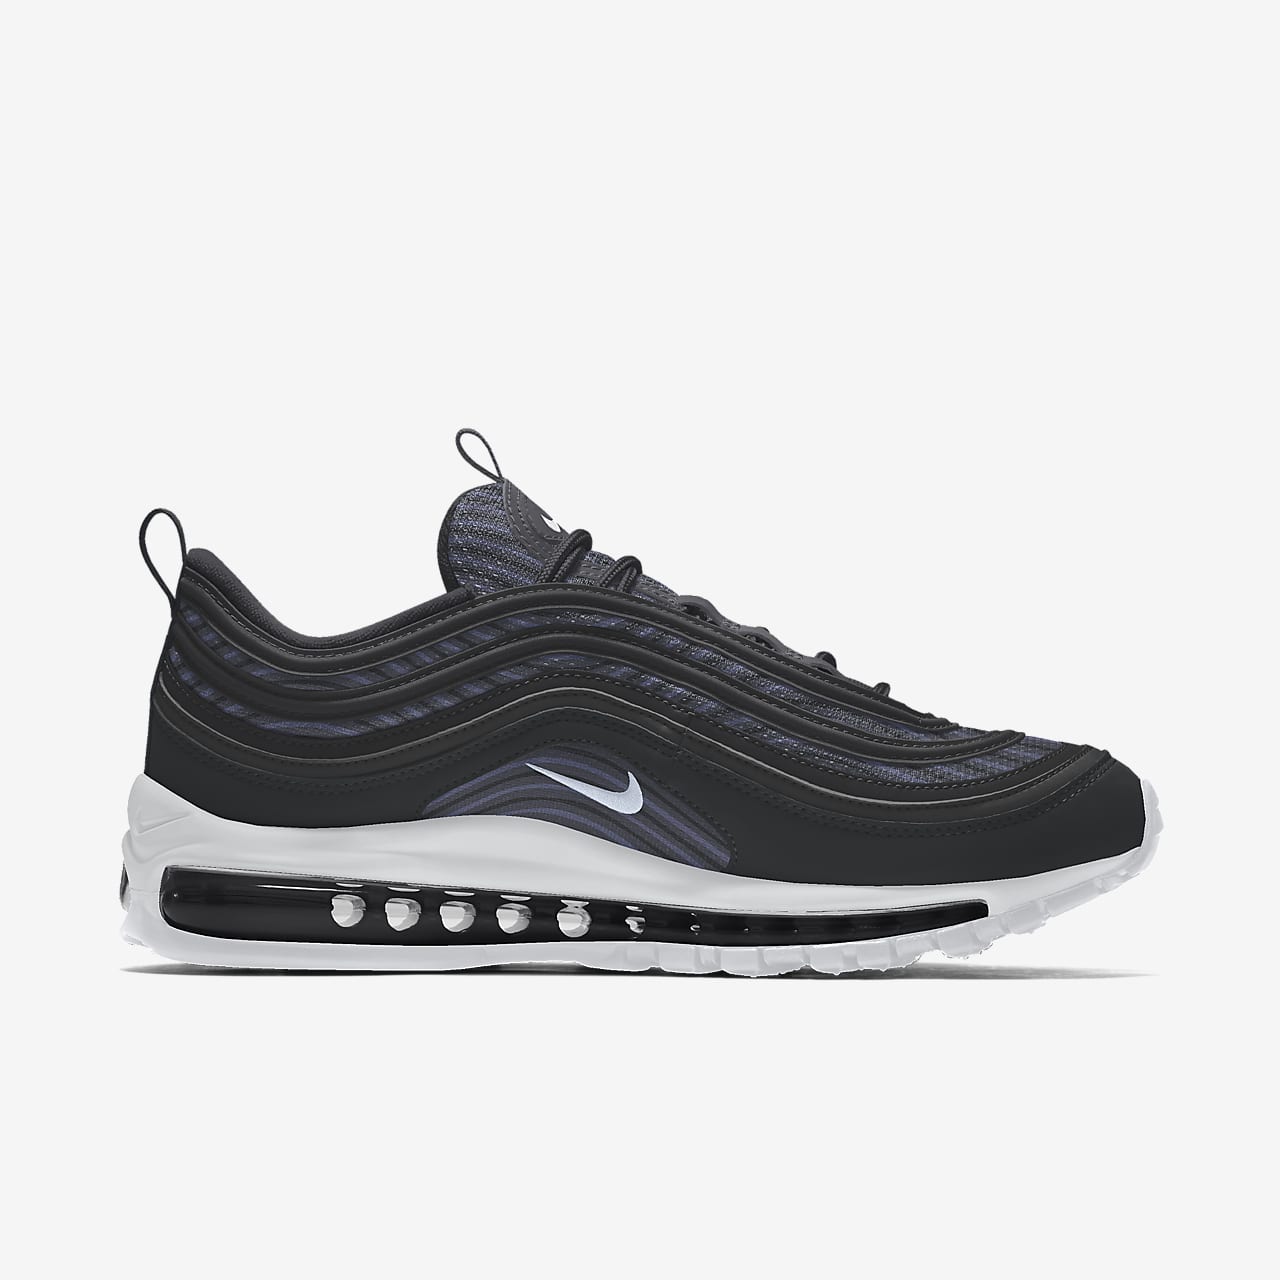 Nike Air Max 97 By personalizables - Hombre. Nike ES